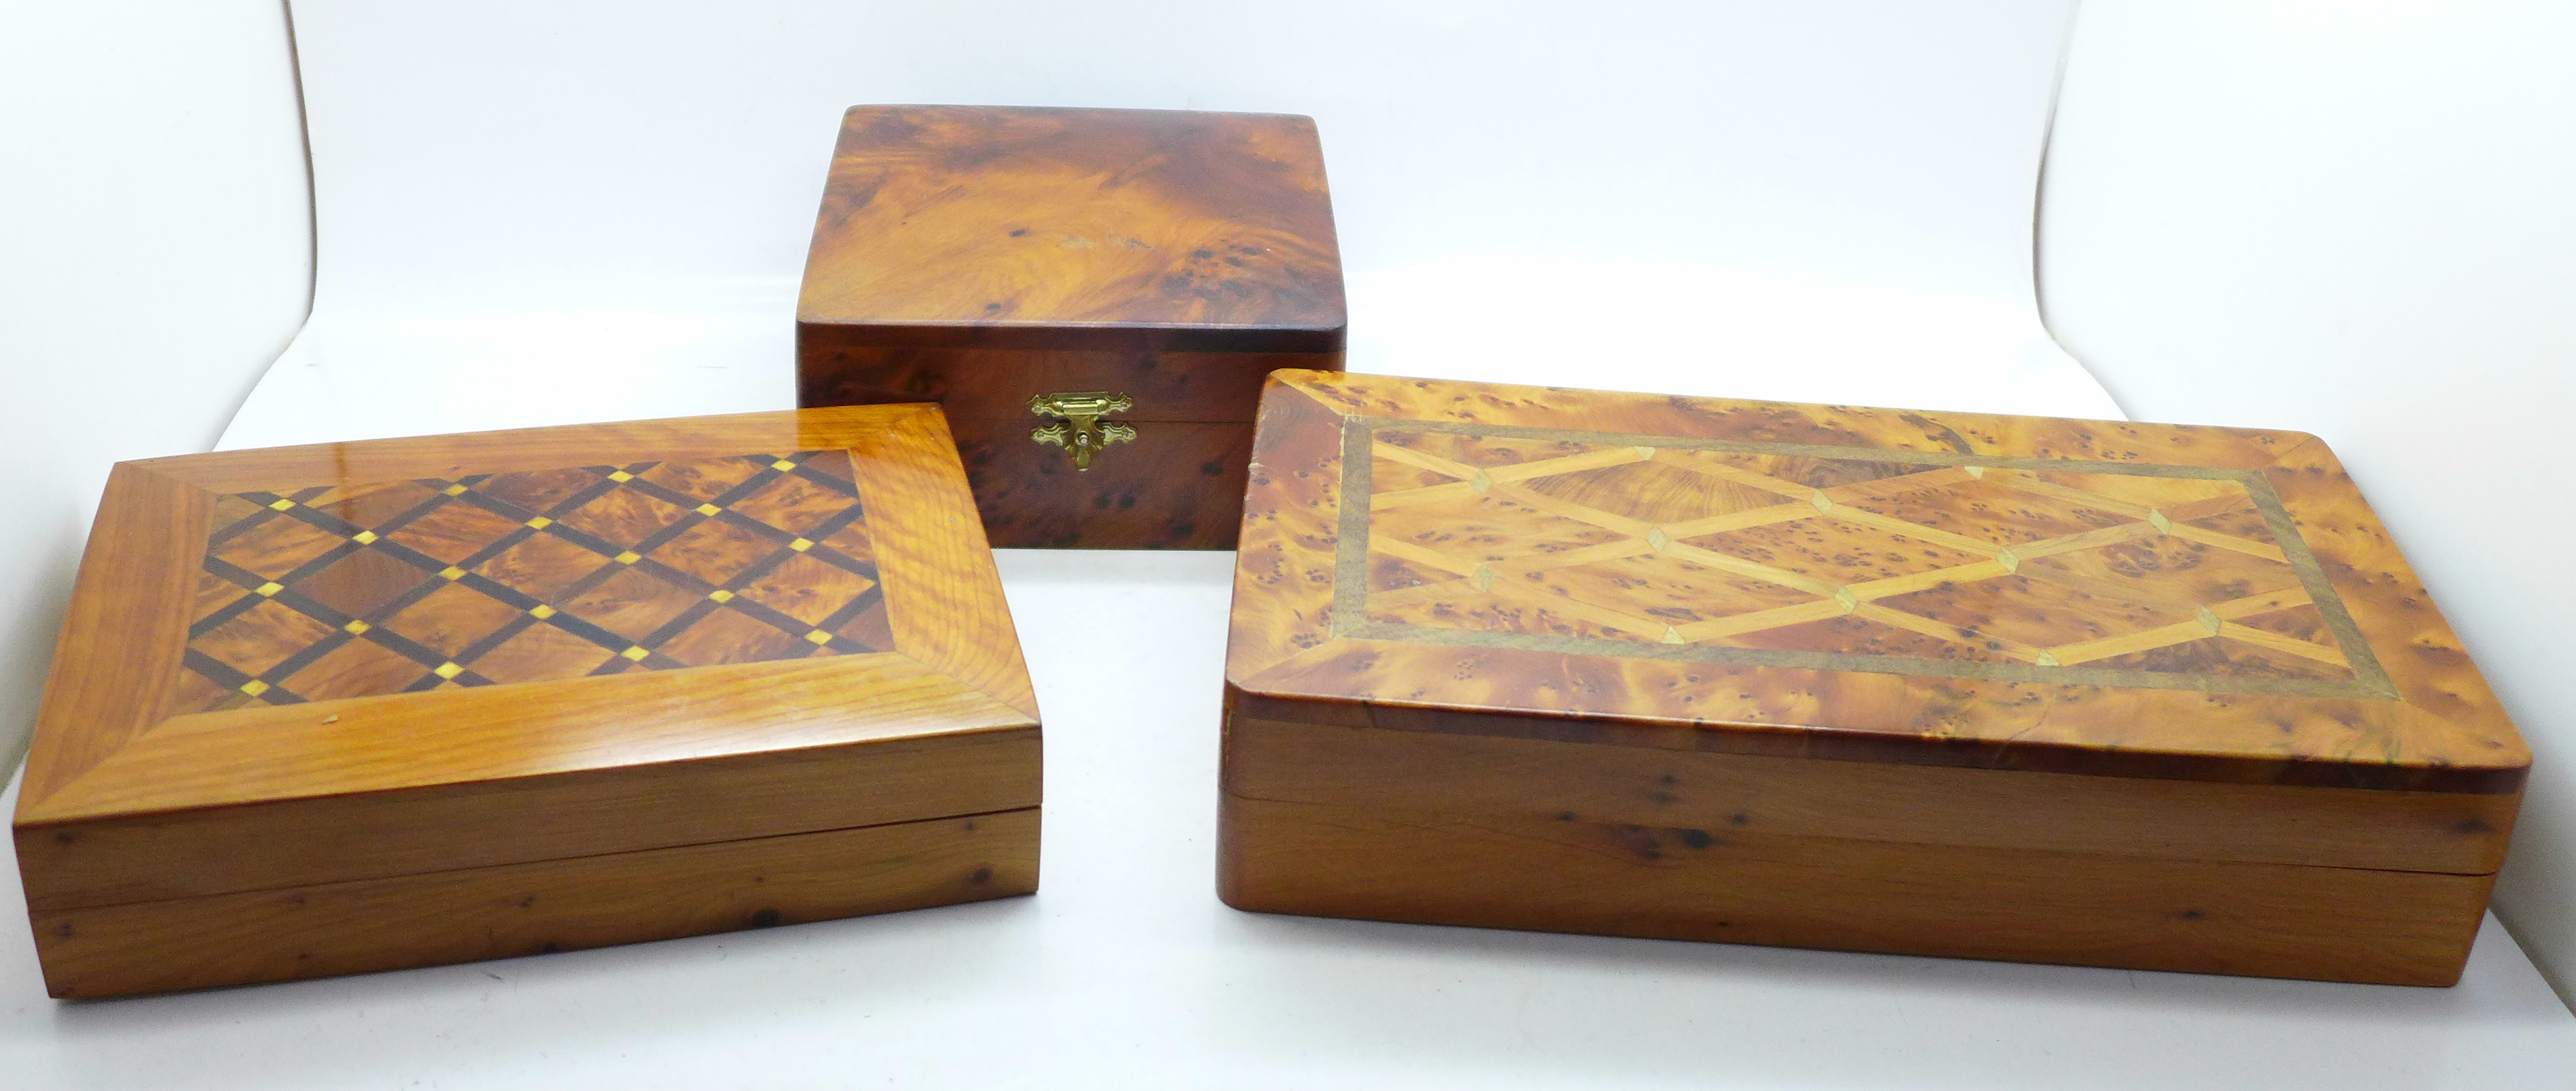 Three thuga wood marquetery boxes plus one other